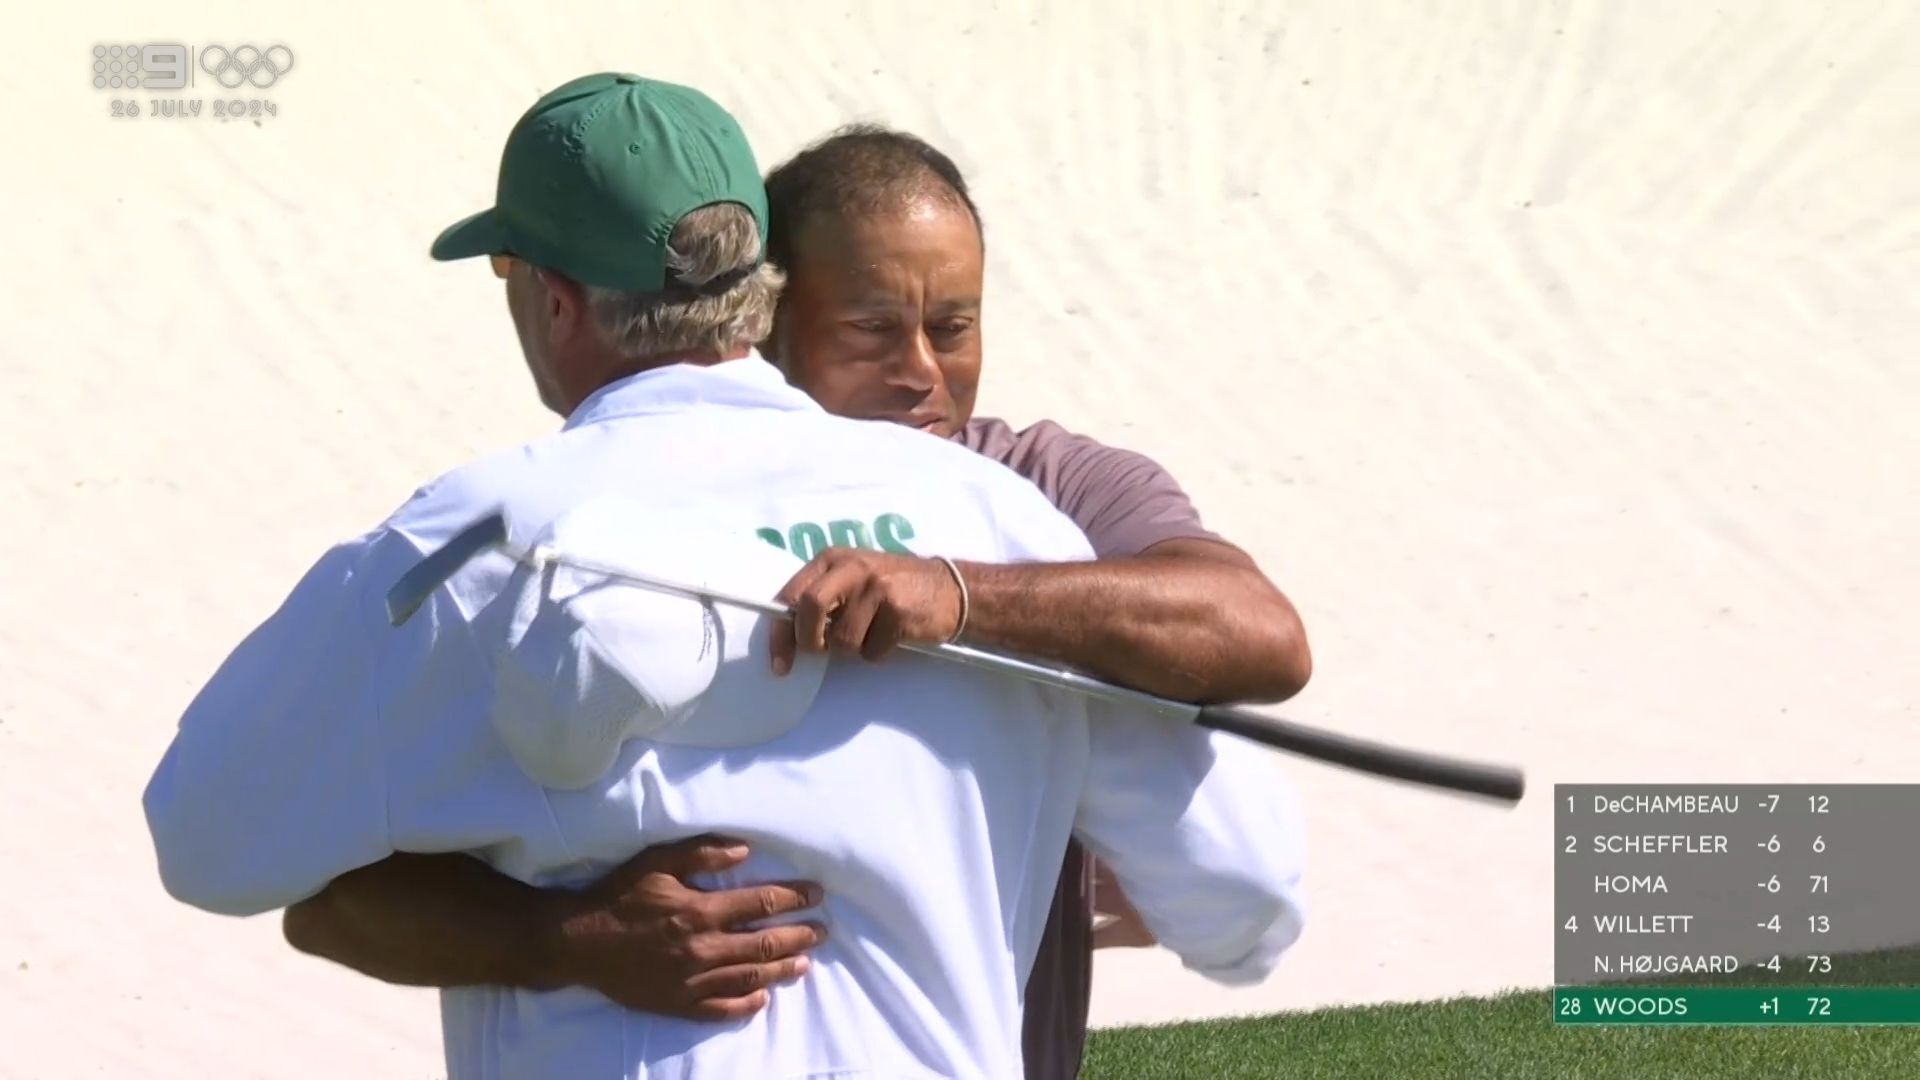 'It's been a long day': Tiger Woods breaks record for most consecutive cuts at The Masters